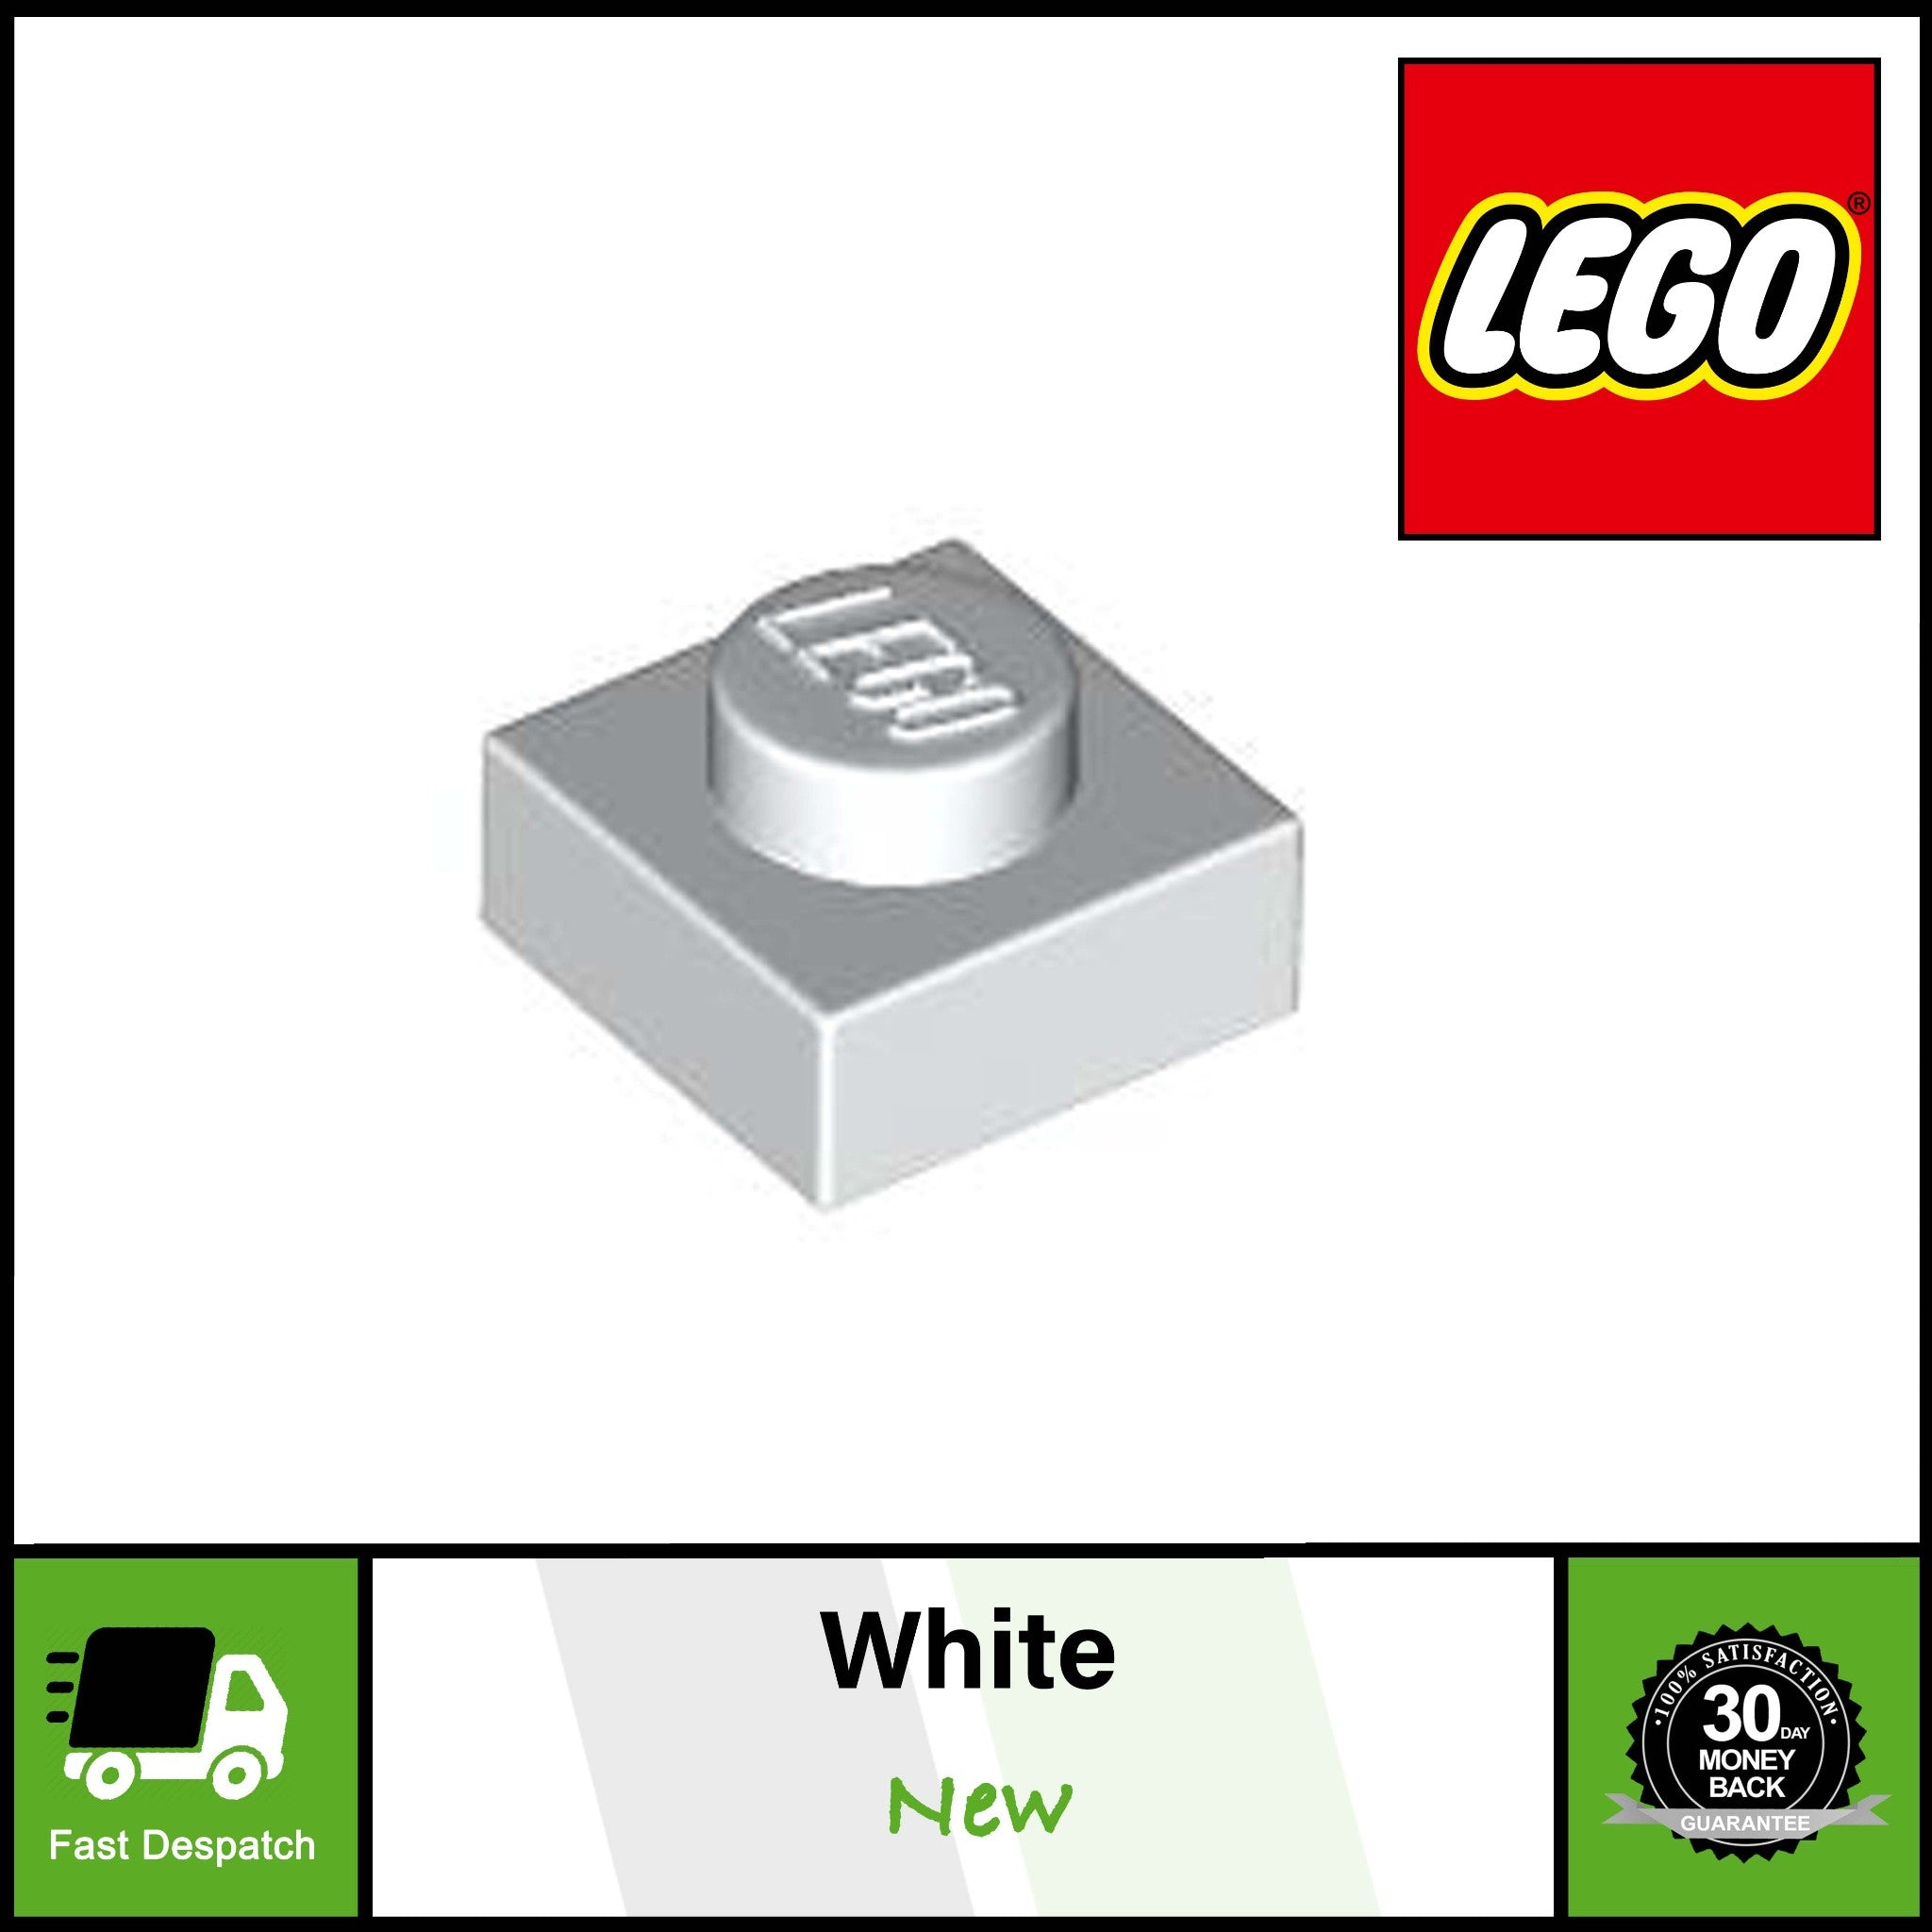 20 40 60 100 200 500 LEGO 1x1 Square Plate 3024 | Can Be Used With Mosaic Art